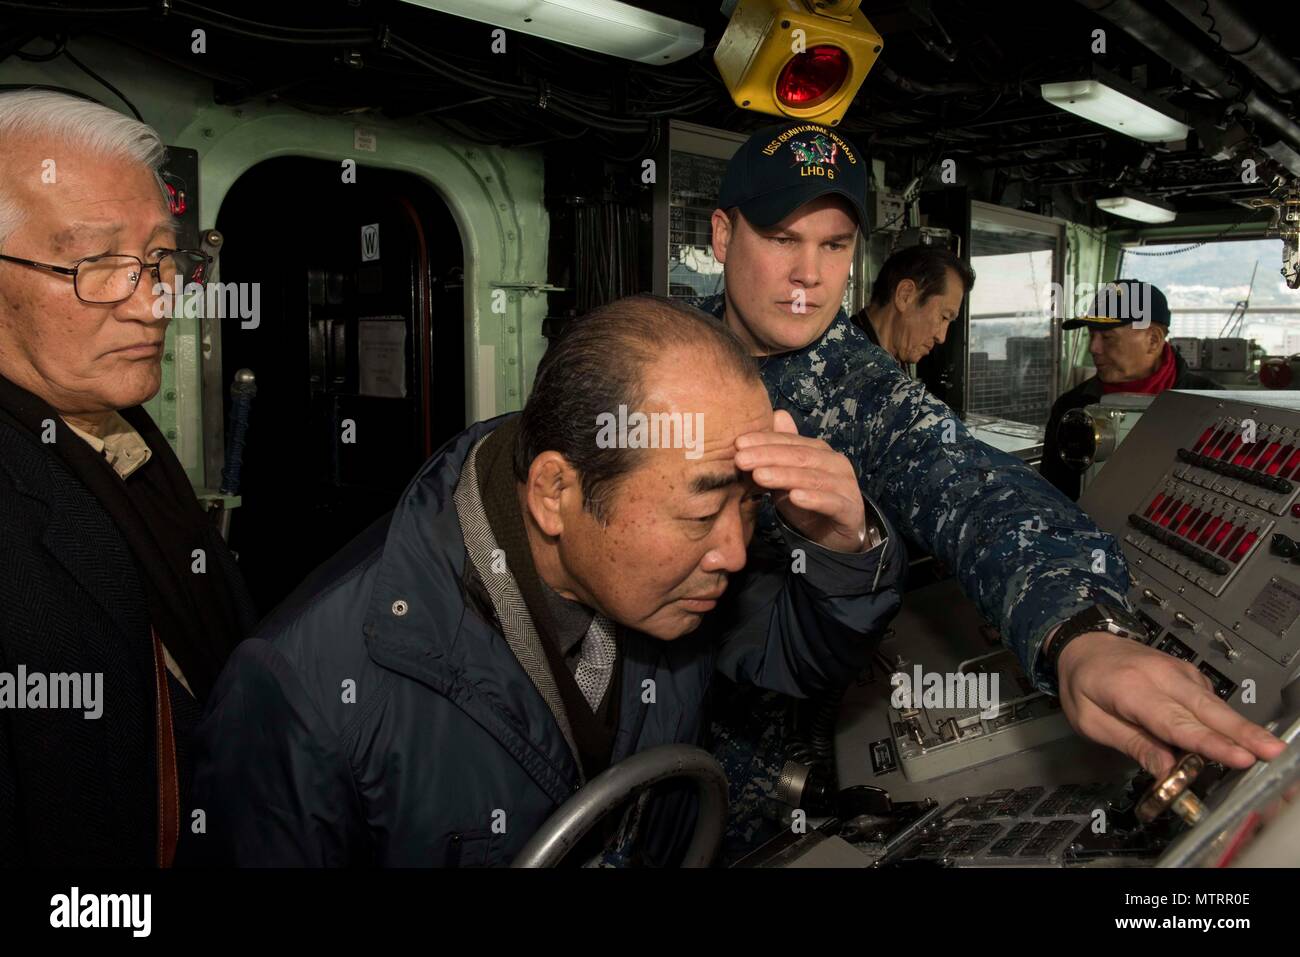 170118-N-NB544-178 SASEBO, Japan (Jan. 18, 2017) Quartermaster 1st Class Matthew Lenerville, from Richardton, N.D., explains bridge equipment on board amphibious assault ship USS Bonhomme Richard (LHD 6) during a tour for Sasebo and Saga city community leaders. Bonhomme Richard, forward-deployed to Sasebo, Japan, is serving forward to provide a rapid-response capability in the event of a regional contingency or natural disaster. (U.S. Navy Photo by Mass Communication Specialist 2nd Class Kyle Carlstrom/Released) Stock Photo